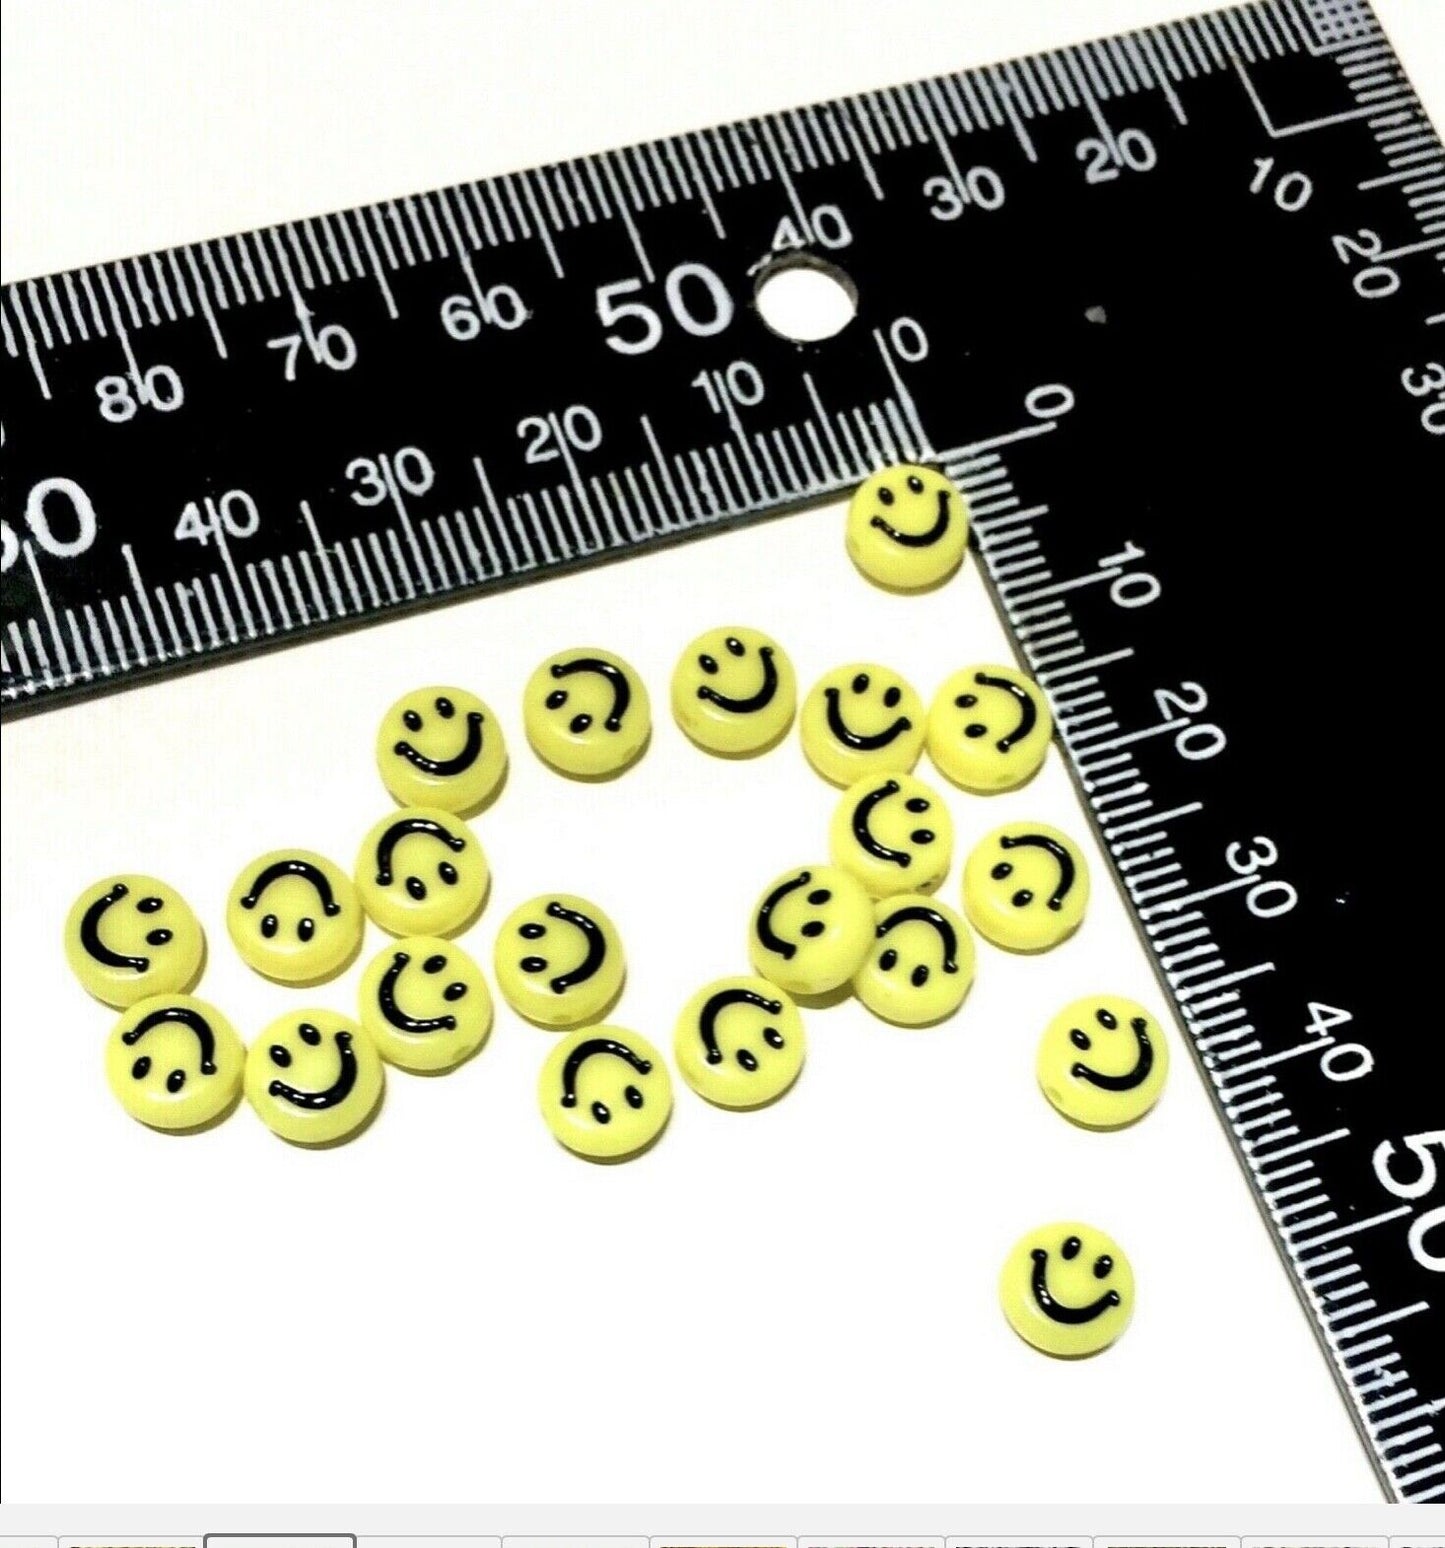 100 pcs Cute 7mm x 3.5mm Yellow Small Smiling Acrylic Beads Charm for Jewellery